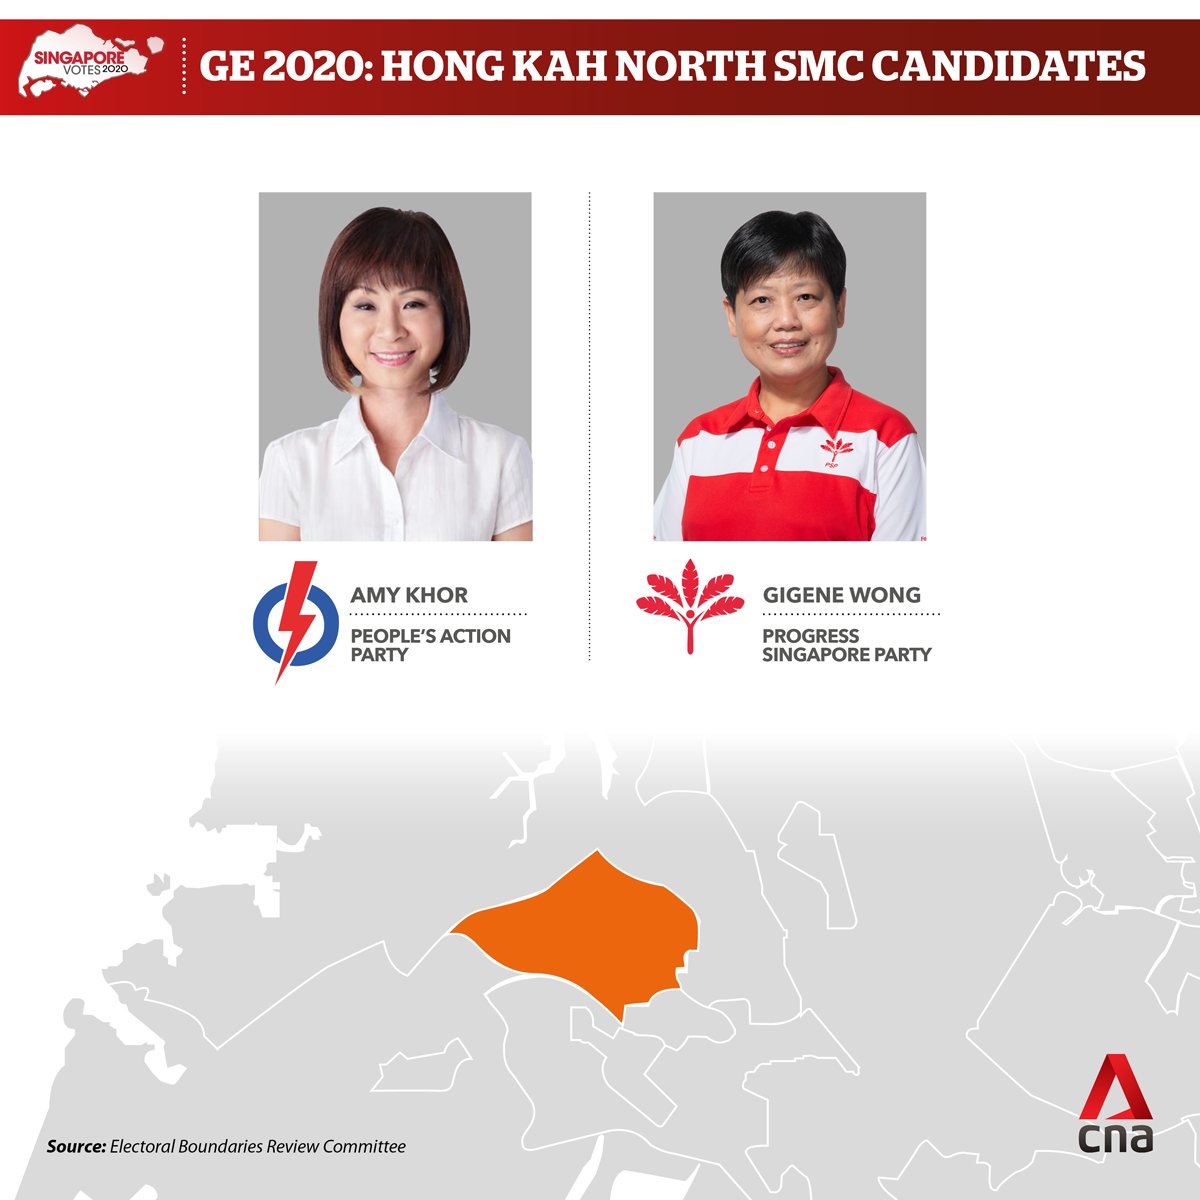  #GE2020  : PAP's Amy Khor takes on Gigene Wong from the PSP in Hong Kah North SMC  https://cna.asia/3ilTzF5 